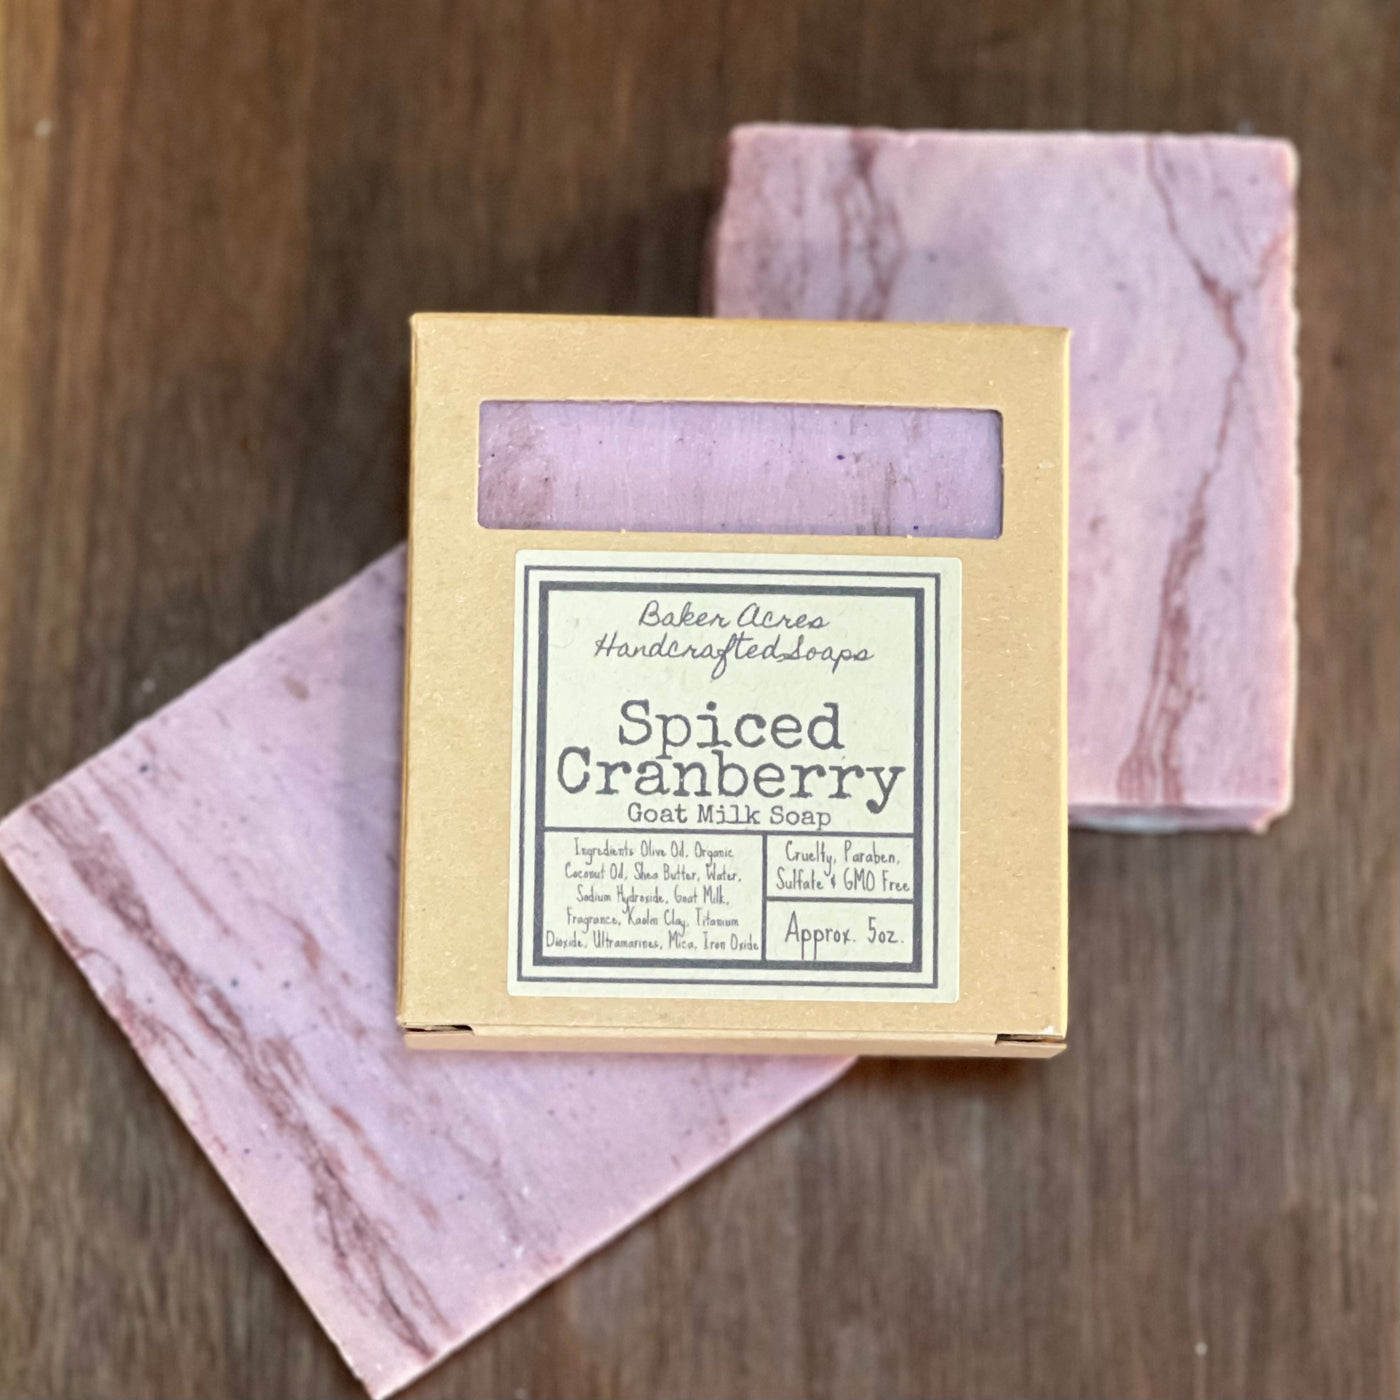 Spiced Cranberry Handcrafted Soap (Goat Milk)